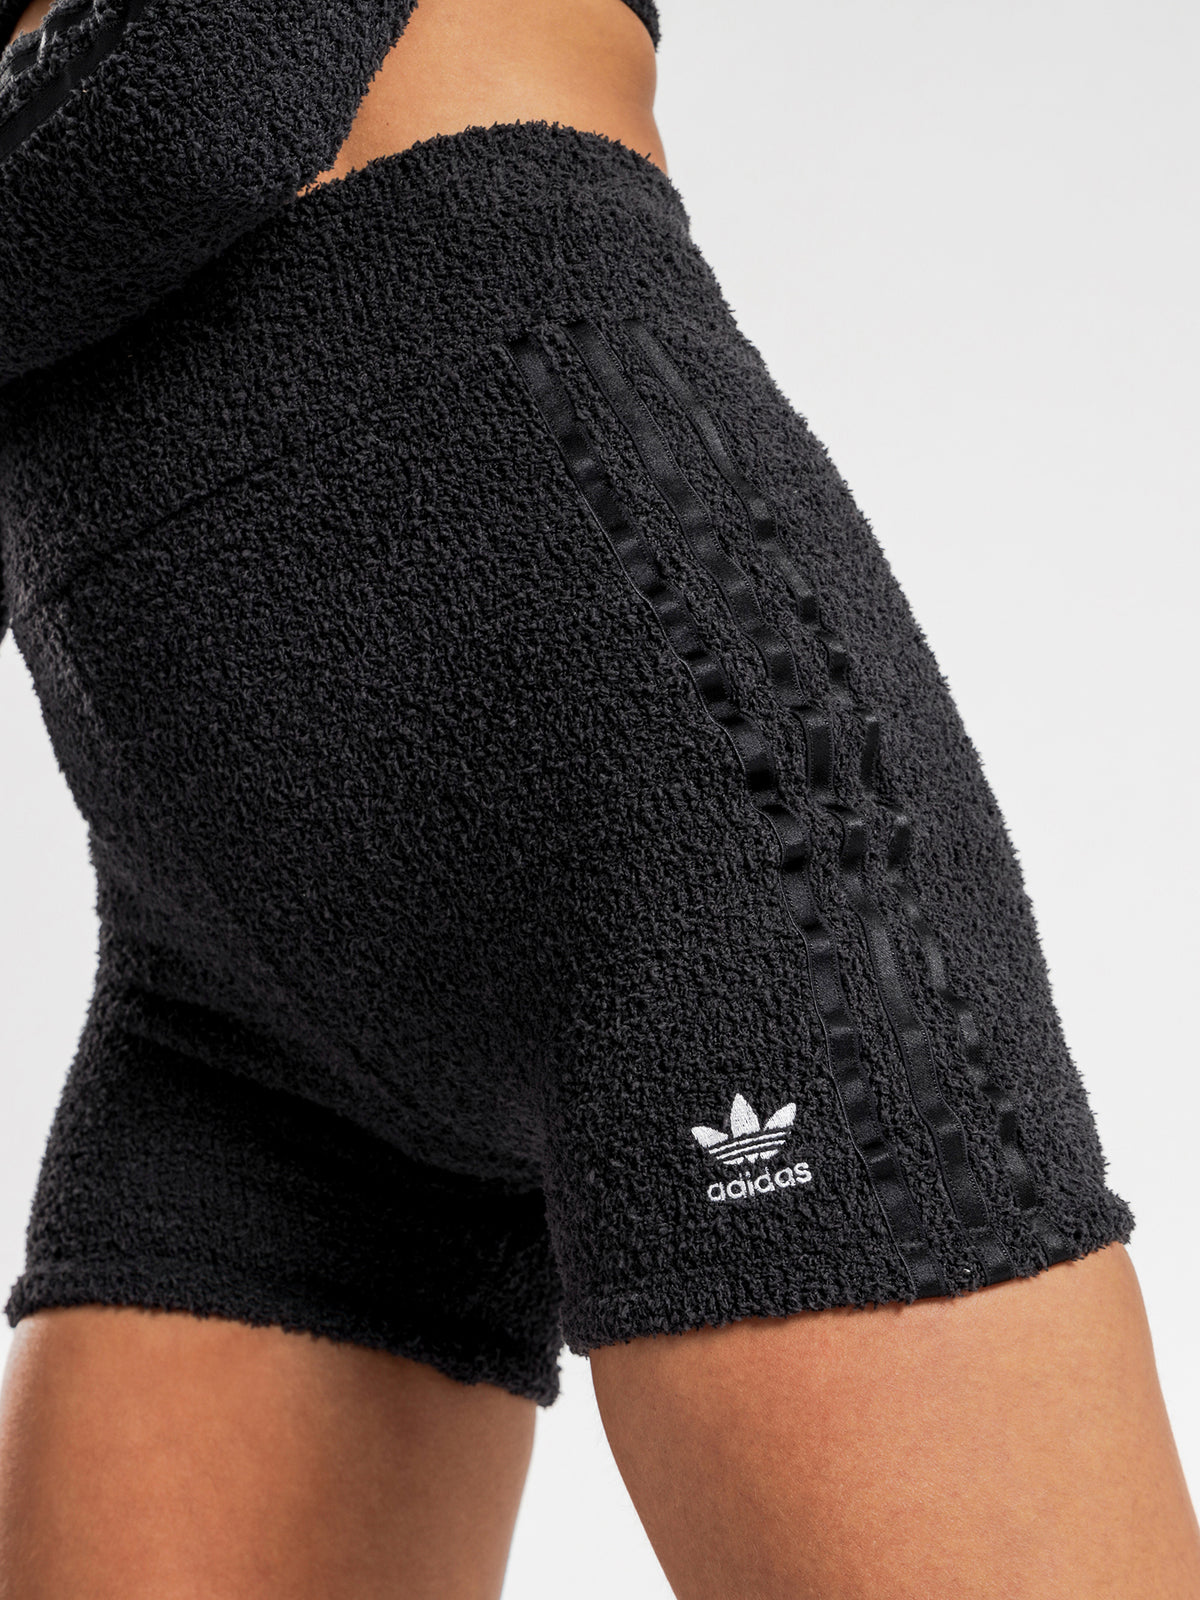 Knit Shorts in Black